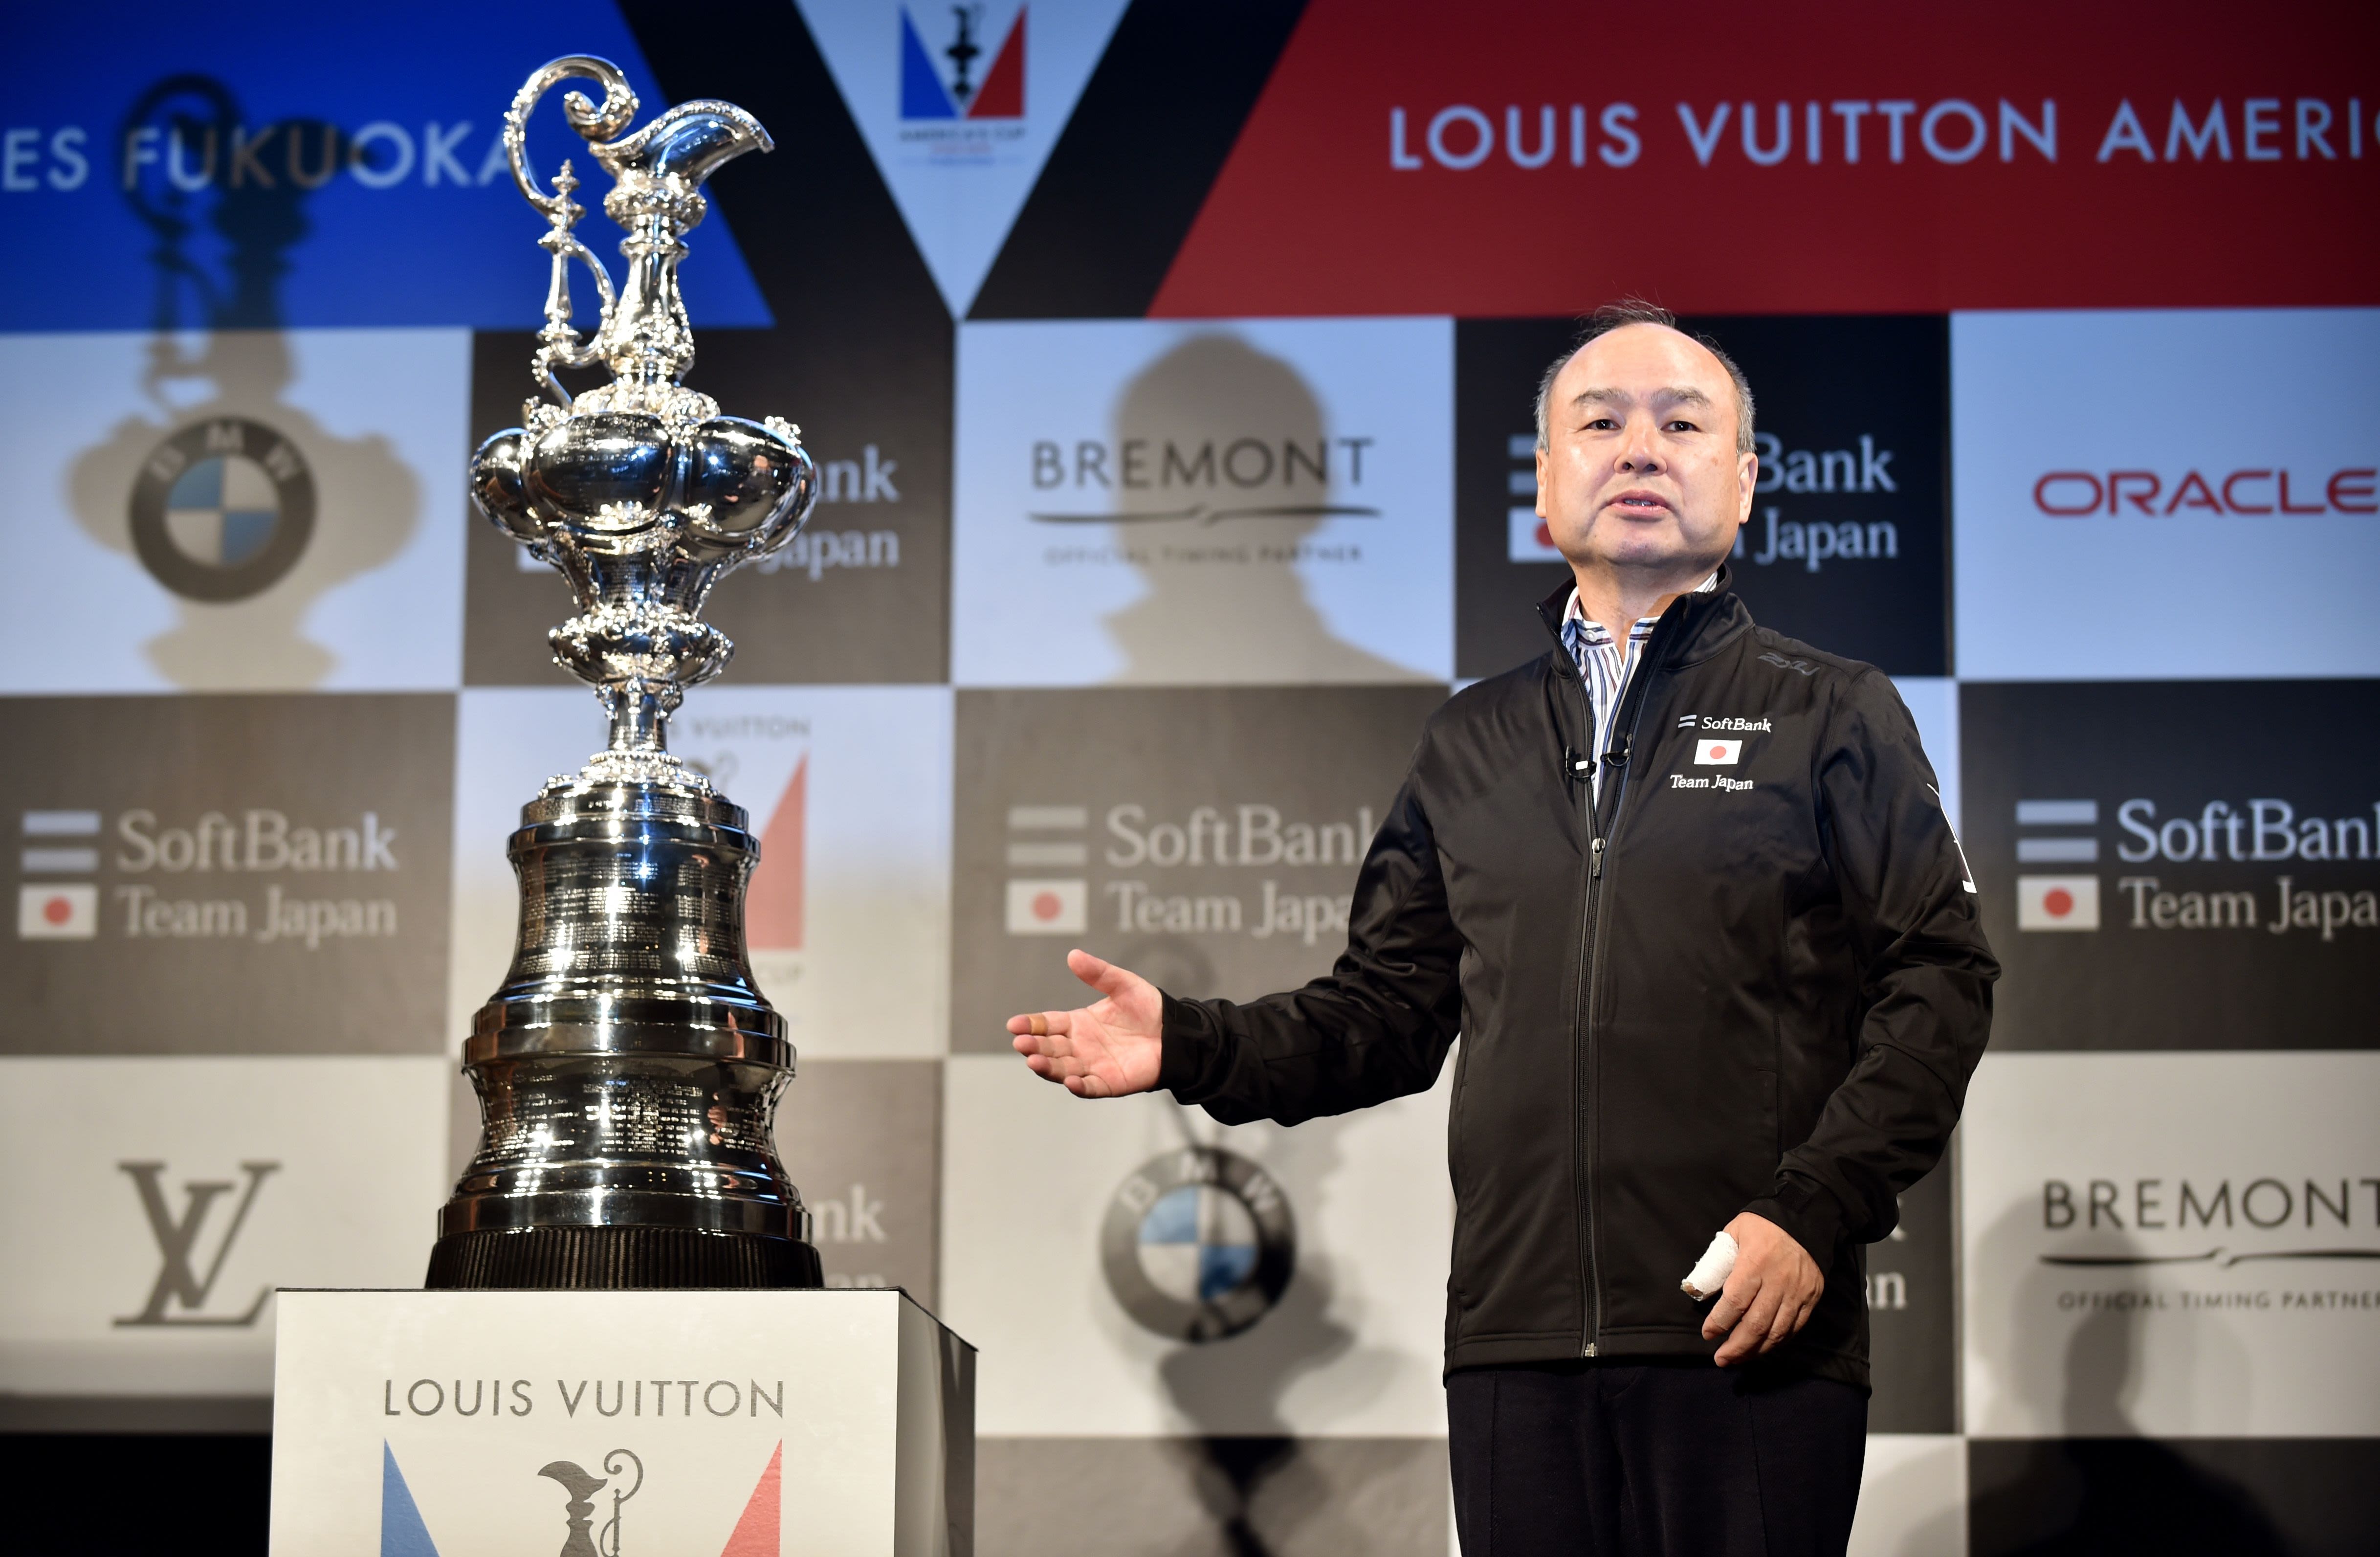 Louis Vuitton returns to America's Cup as title partner and